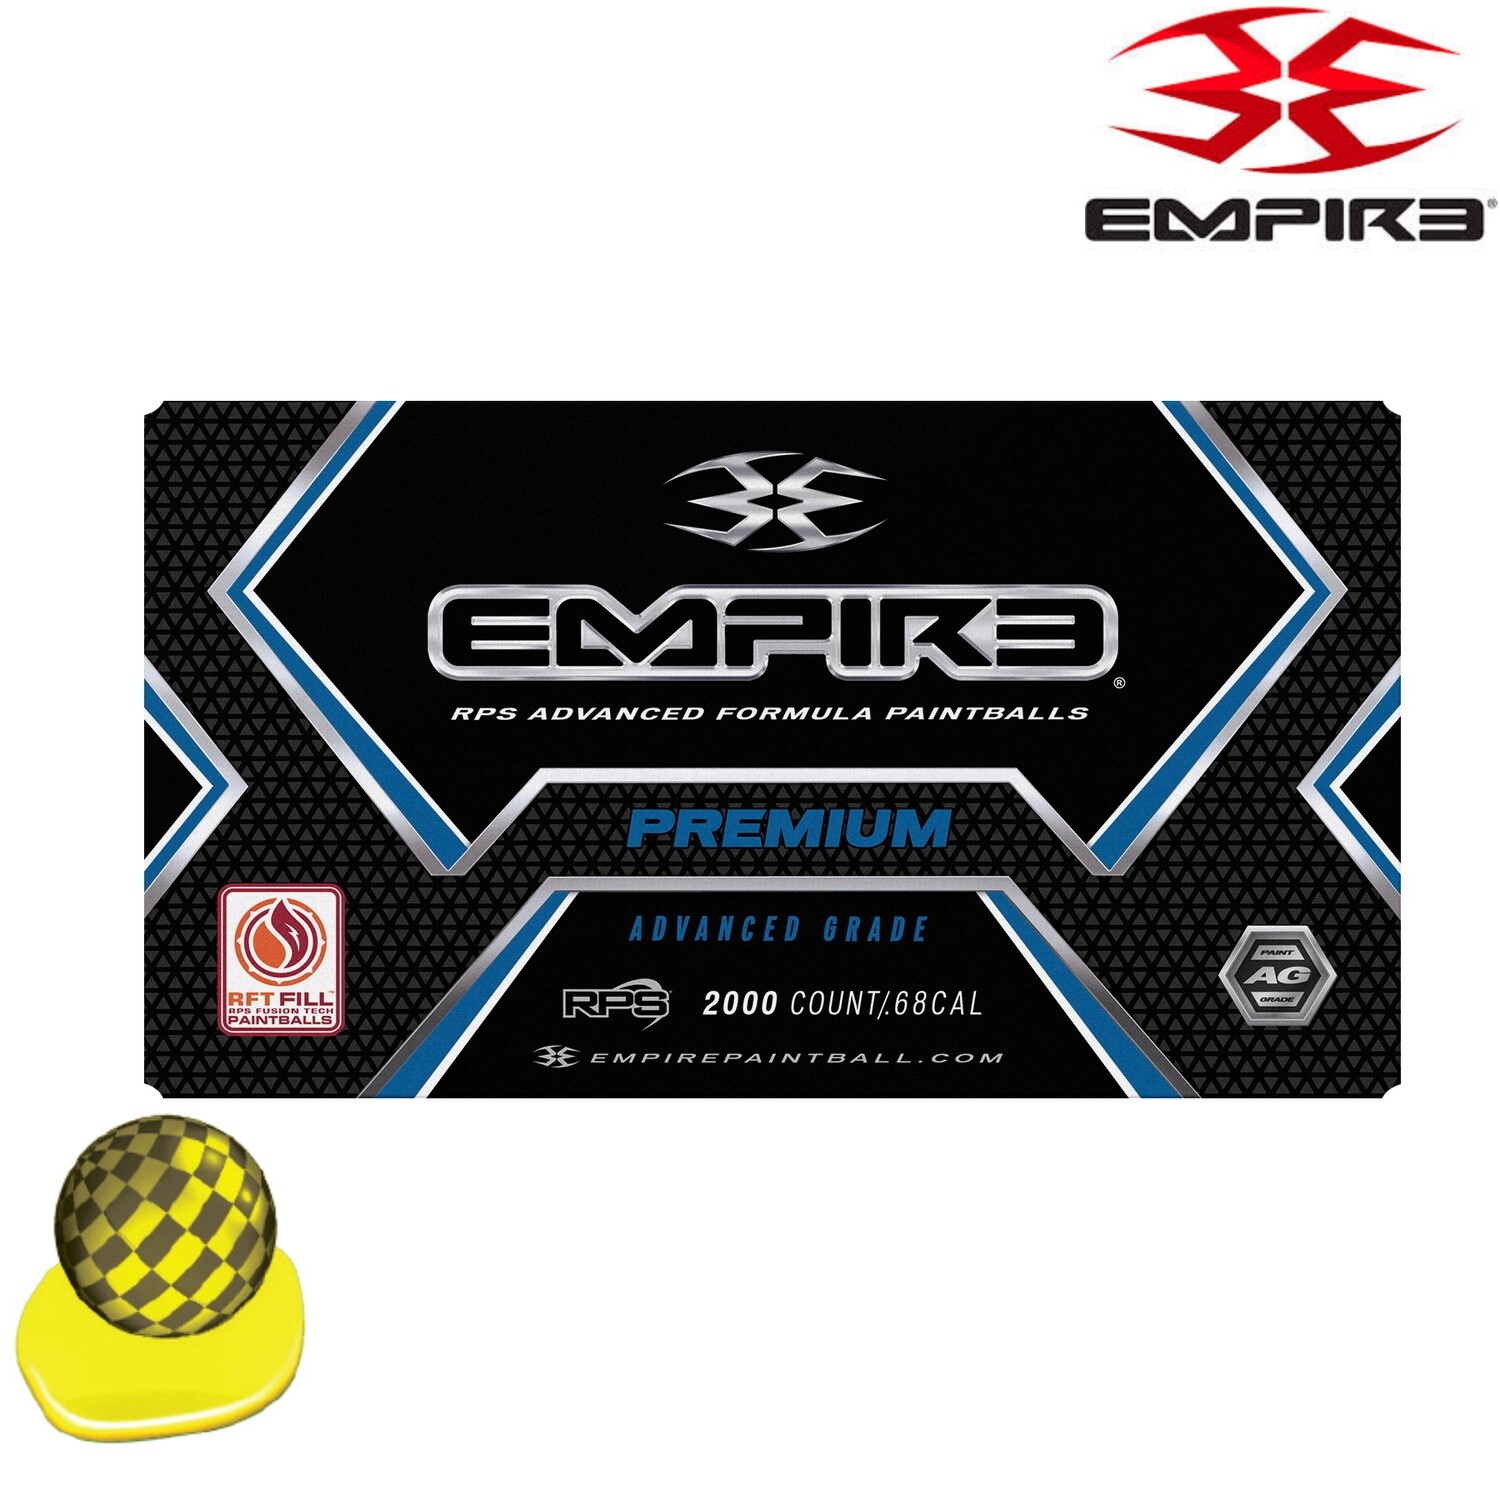 Empire Premium .68 cal Paintballs - Case of 2000 Rds - Yellow/Carbon Fiber Shell - Yellow Fill